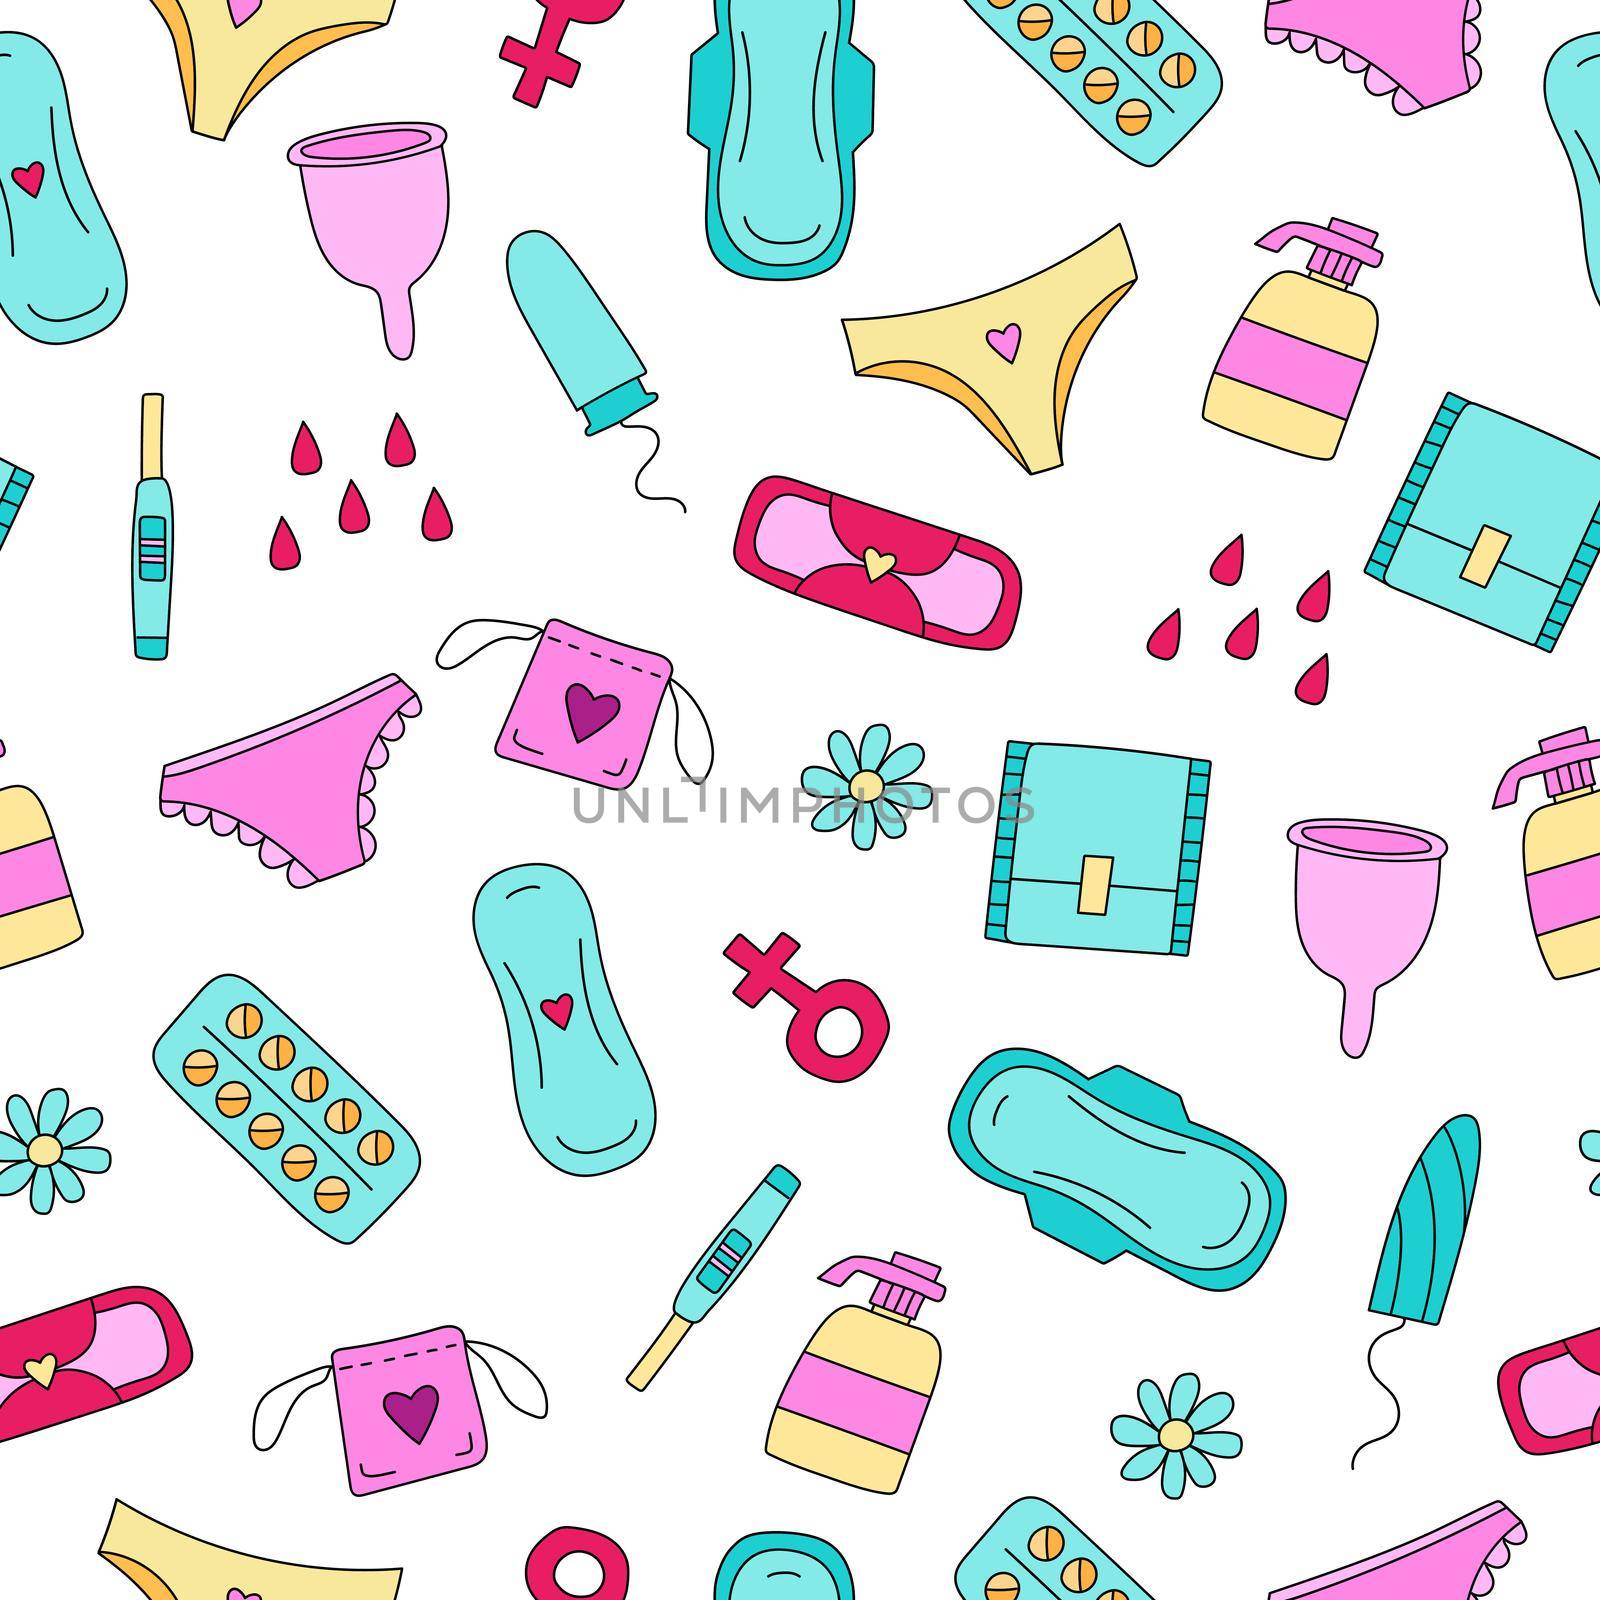 Seamless pattern illustration with feminine hygiene products. Tampons, pads. Menstrual protection.